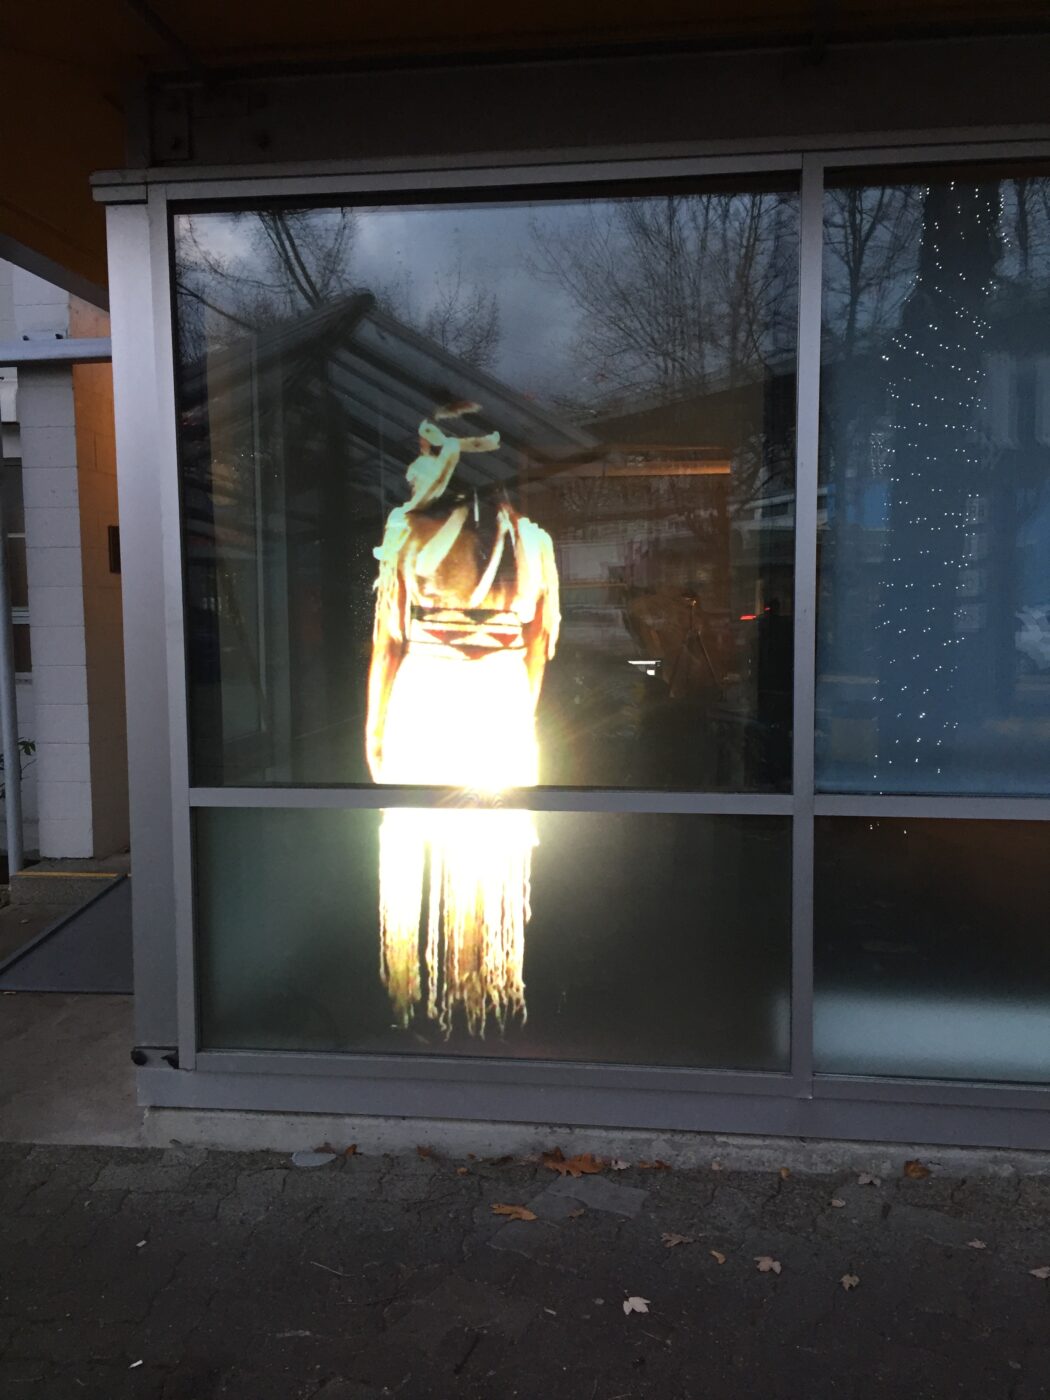 A projected image of ab Indigenous woman, turned away on a large window